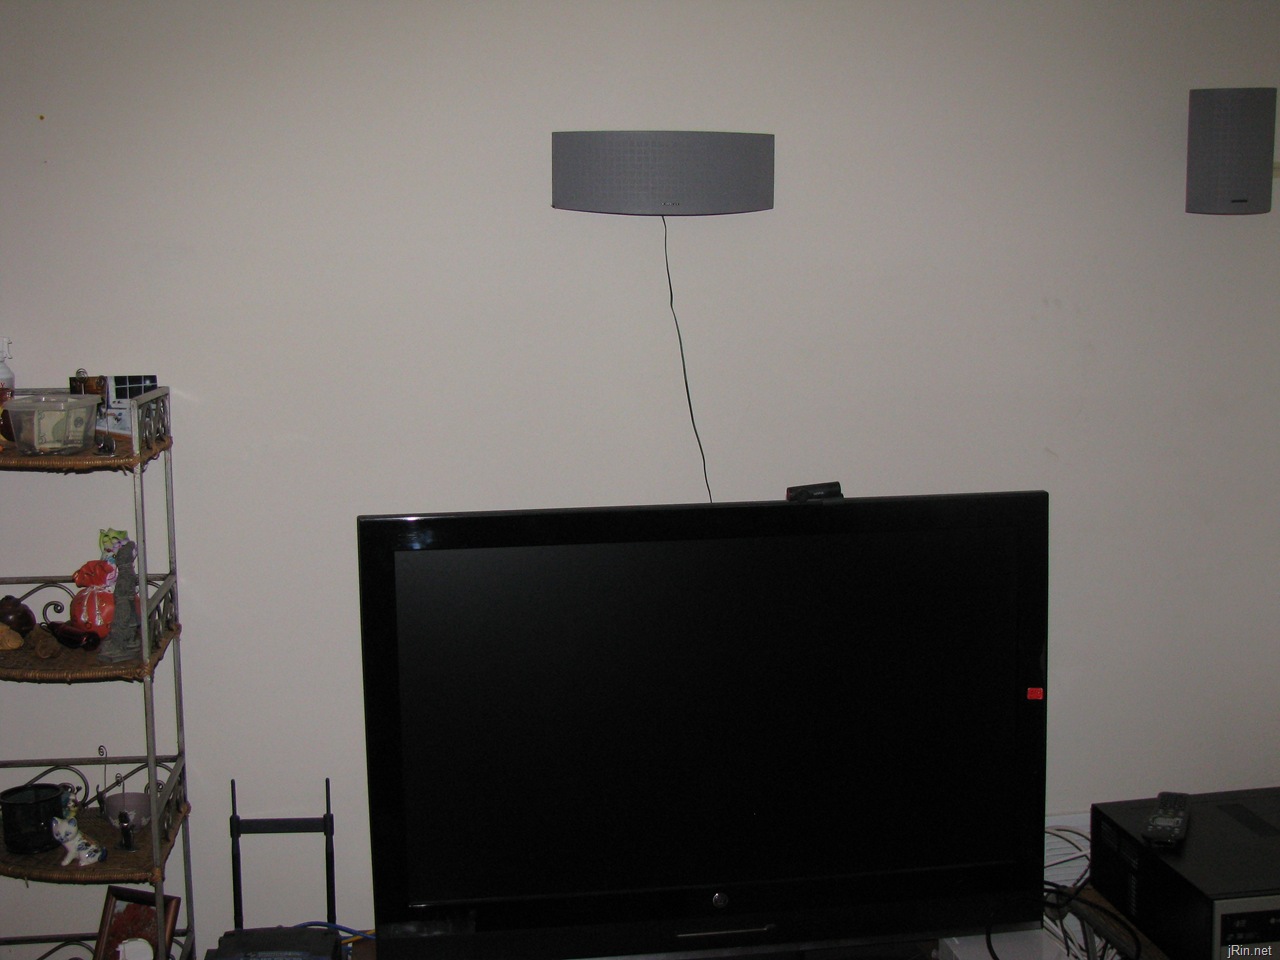 How To Hide Wall Mounted Speaker Wires, Hiding Surround Sound Wires